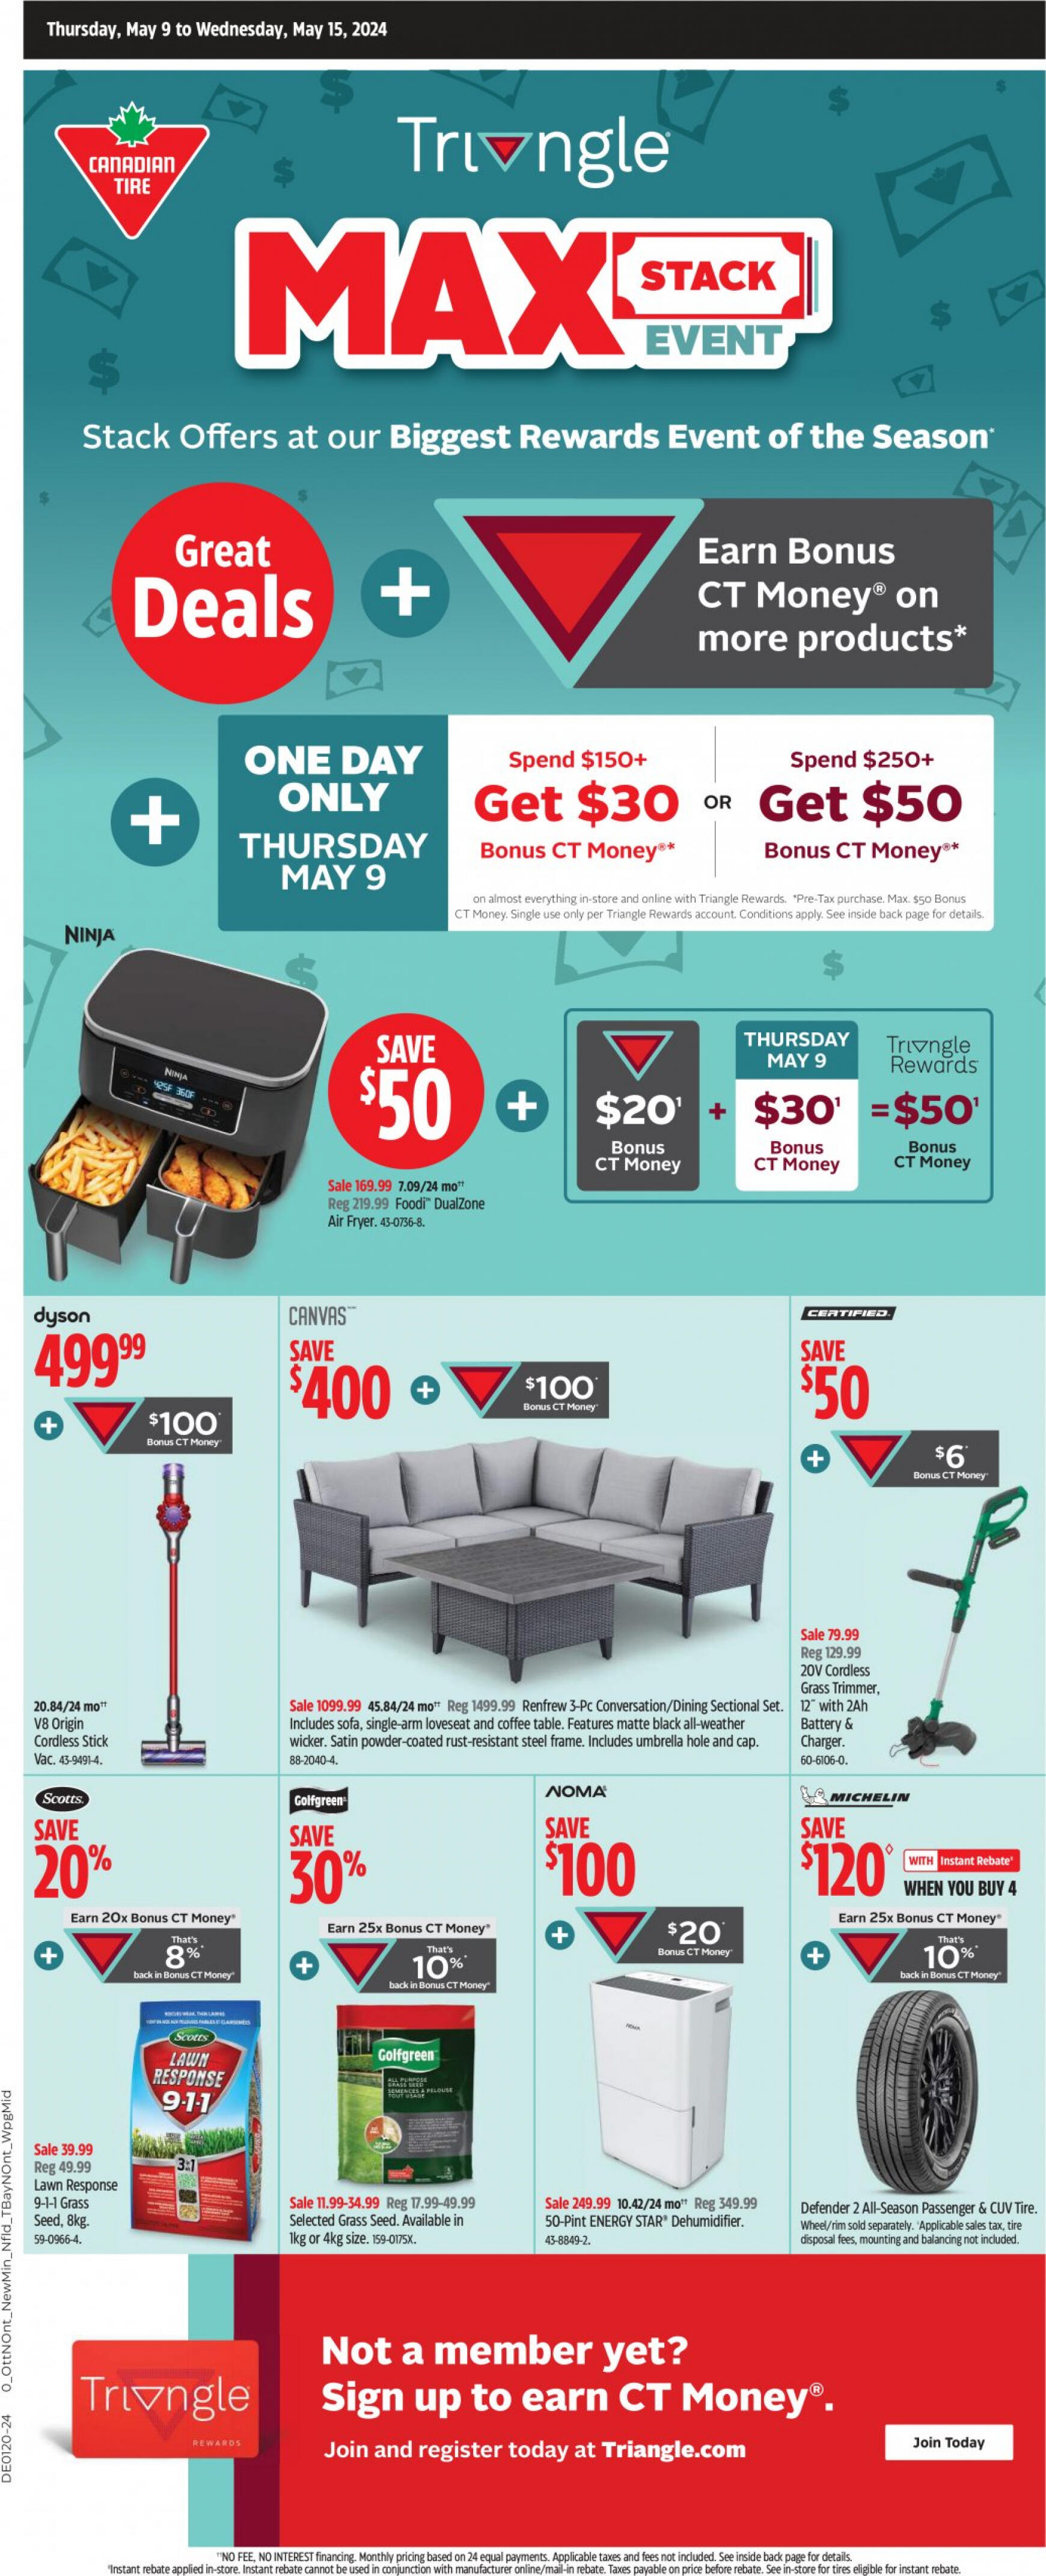 canadian-tire - Canadian Tire flyer current 09.05. - 15.05.